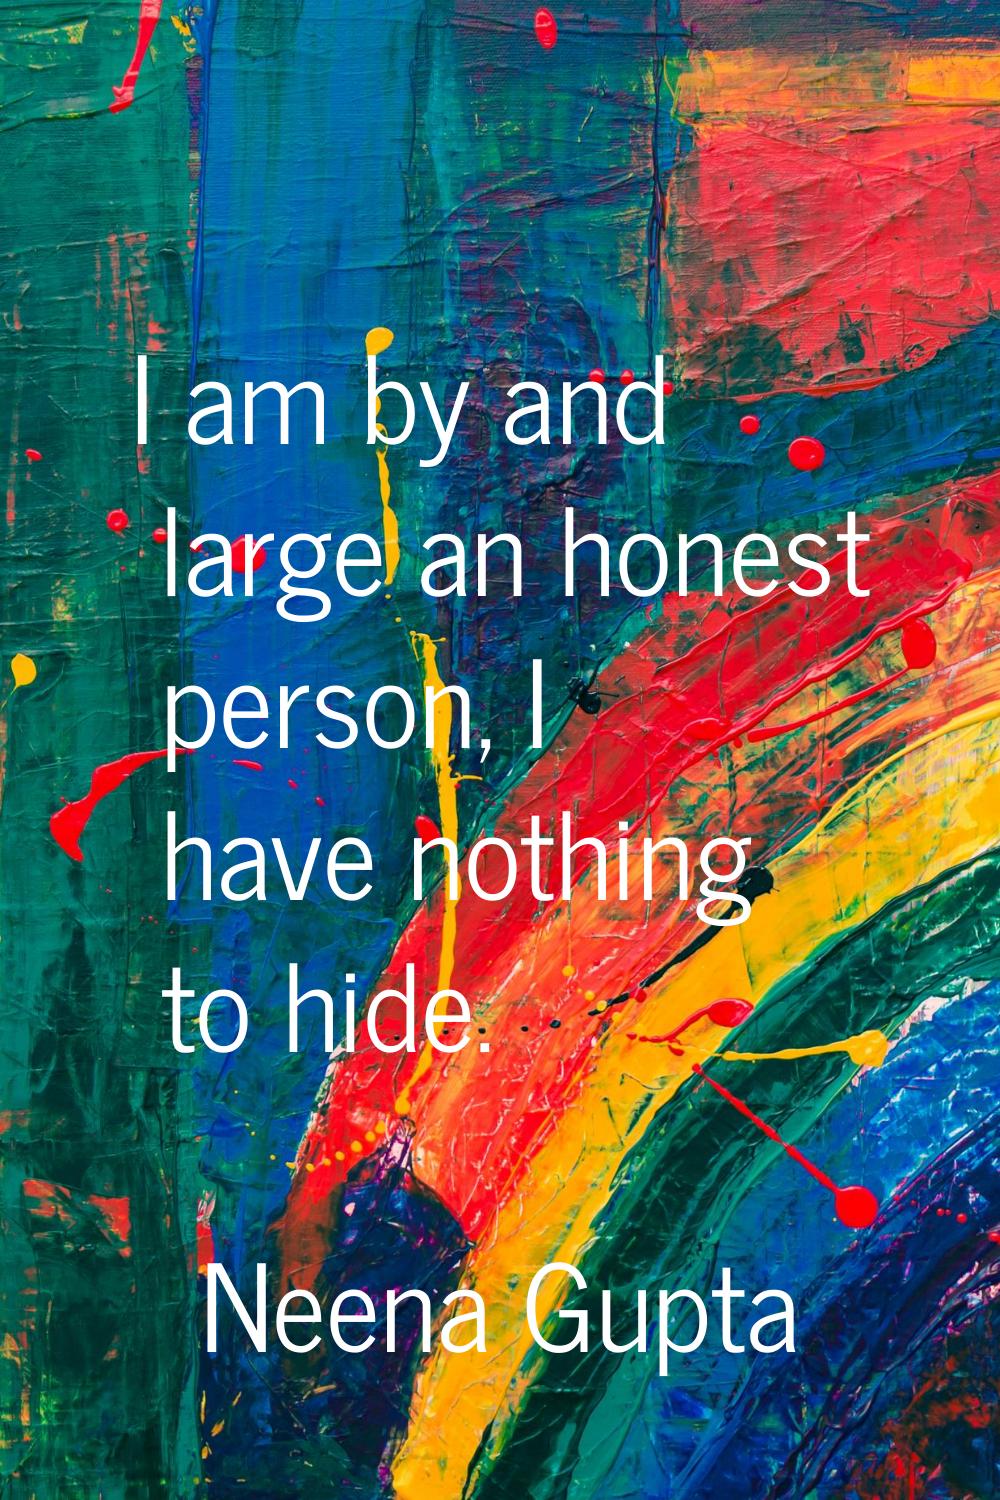 I am by and large an honest person, I have nothing to hide.